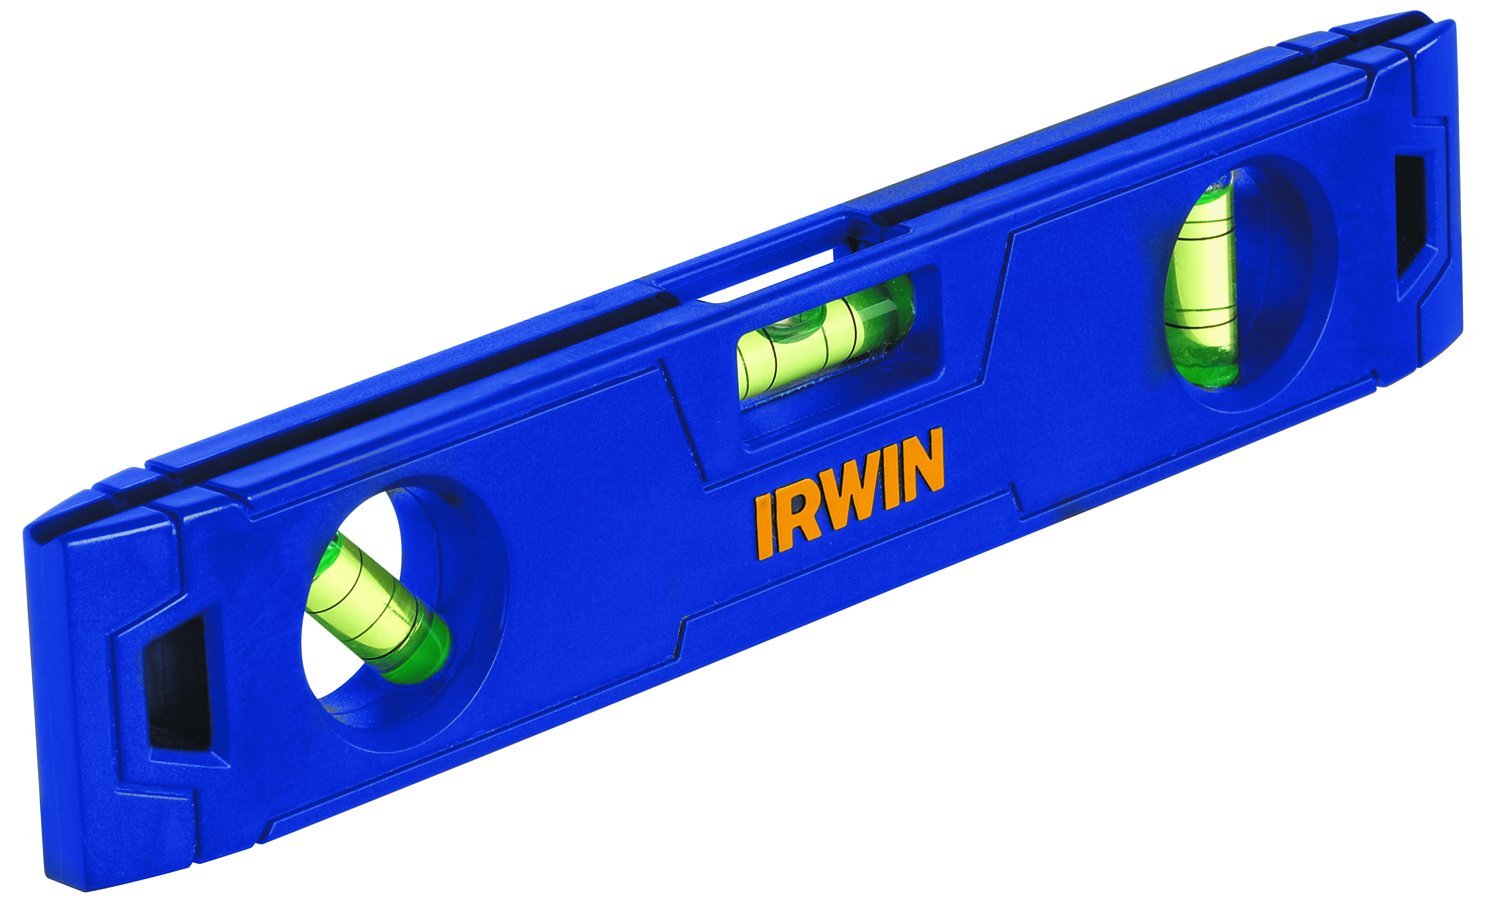 9" IRWIN Tools 50 Magnetic Torpedo Level (Blue) $3.58 + Free Shipping w/ Prime or on $25+